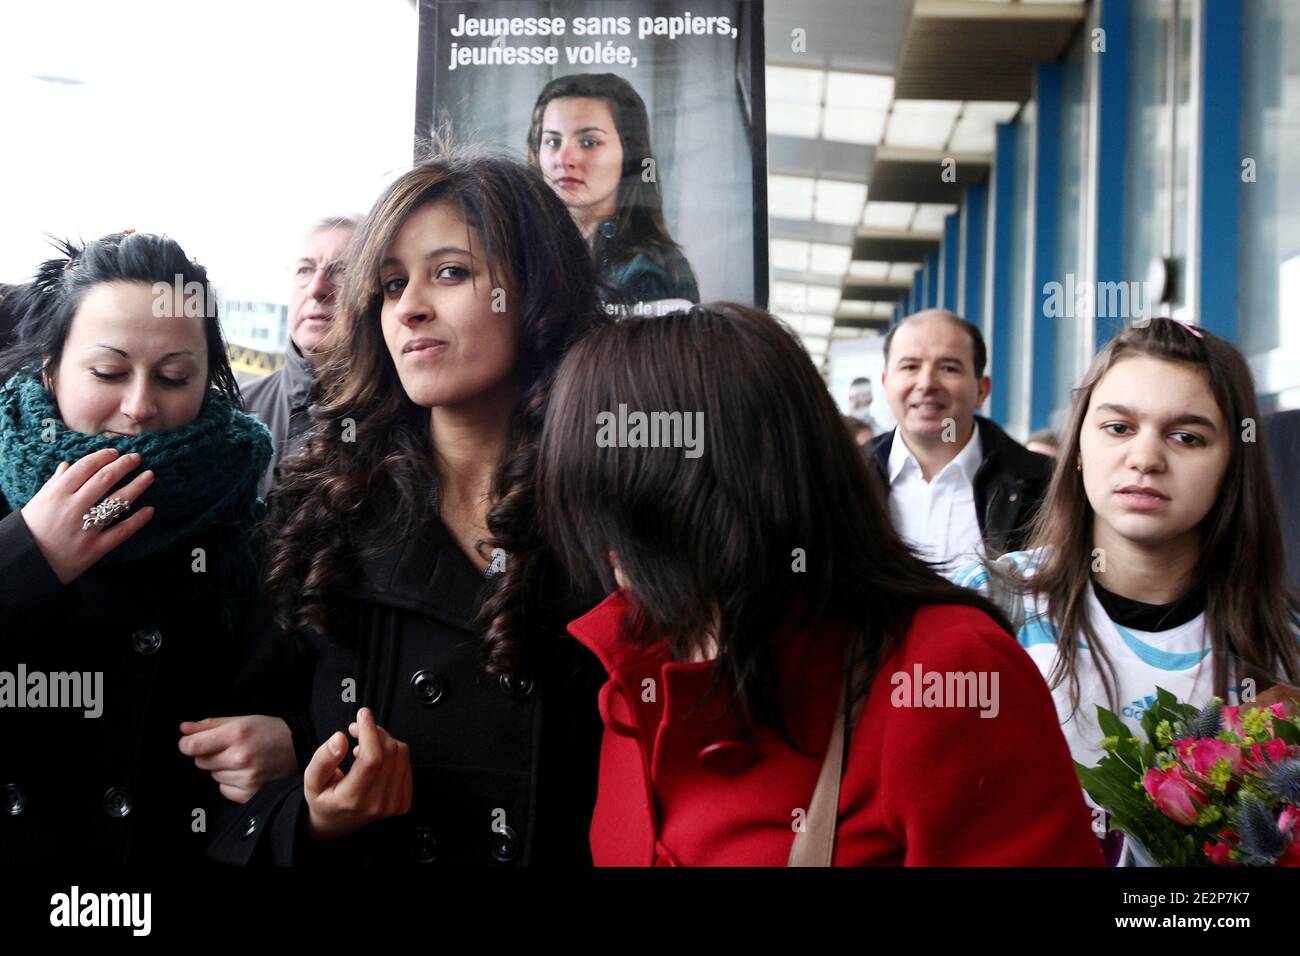 Najlae Lhimer a Moroccan high school student recently expelled from France as an illegal immigrant is welcomed upon her arrival at Orly airport, in Paris, France, from Casablanca, on March 13, 2010. Najlae, who was arrested last February after pressing charges of violence against her brother and expelled to Morocco as illegall immigrant, was authorized this week to return to France by French President Nicolas Sarkozy. Photo by Stephane Lemouton/ABACAPRESS.COM Stock Photo